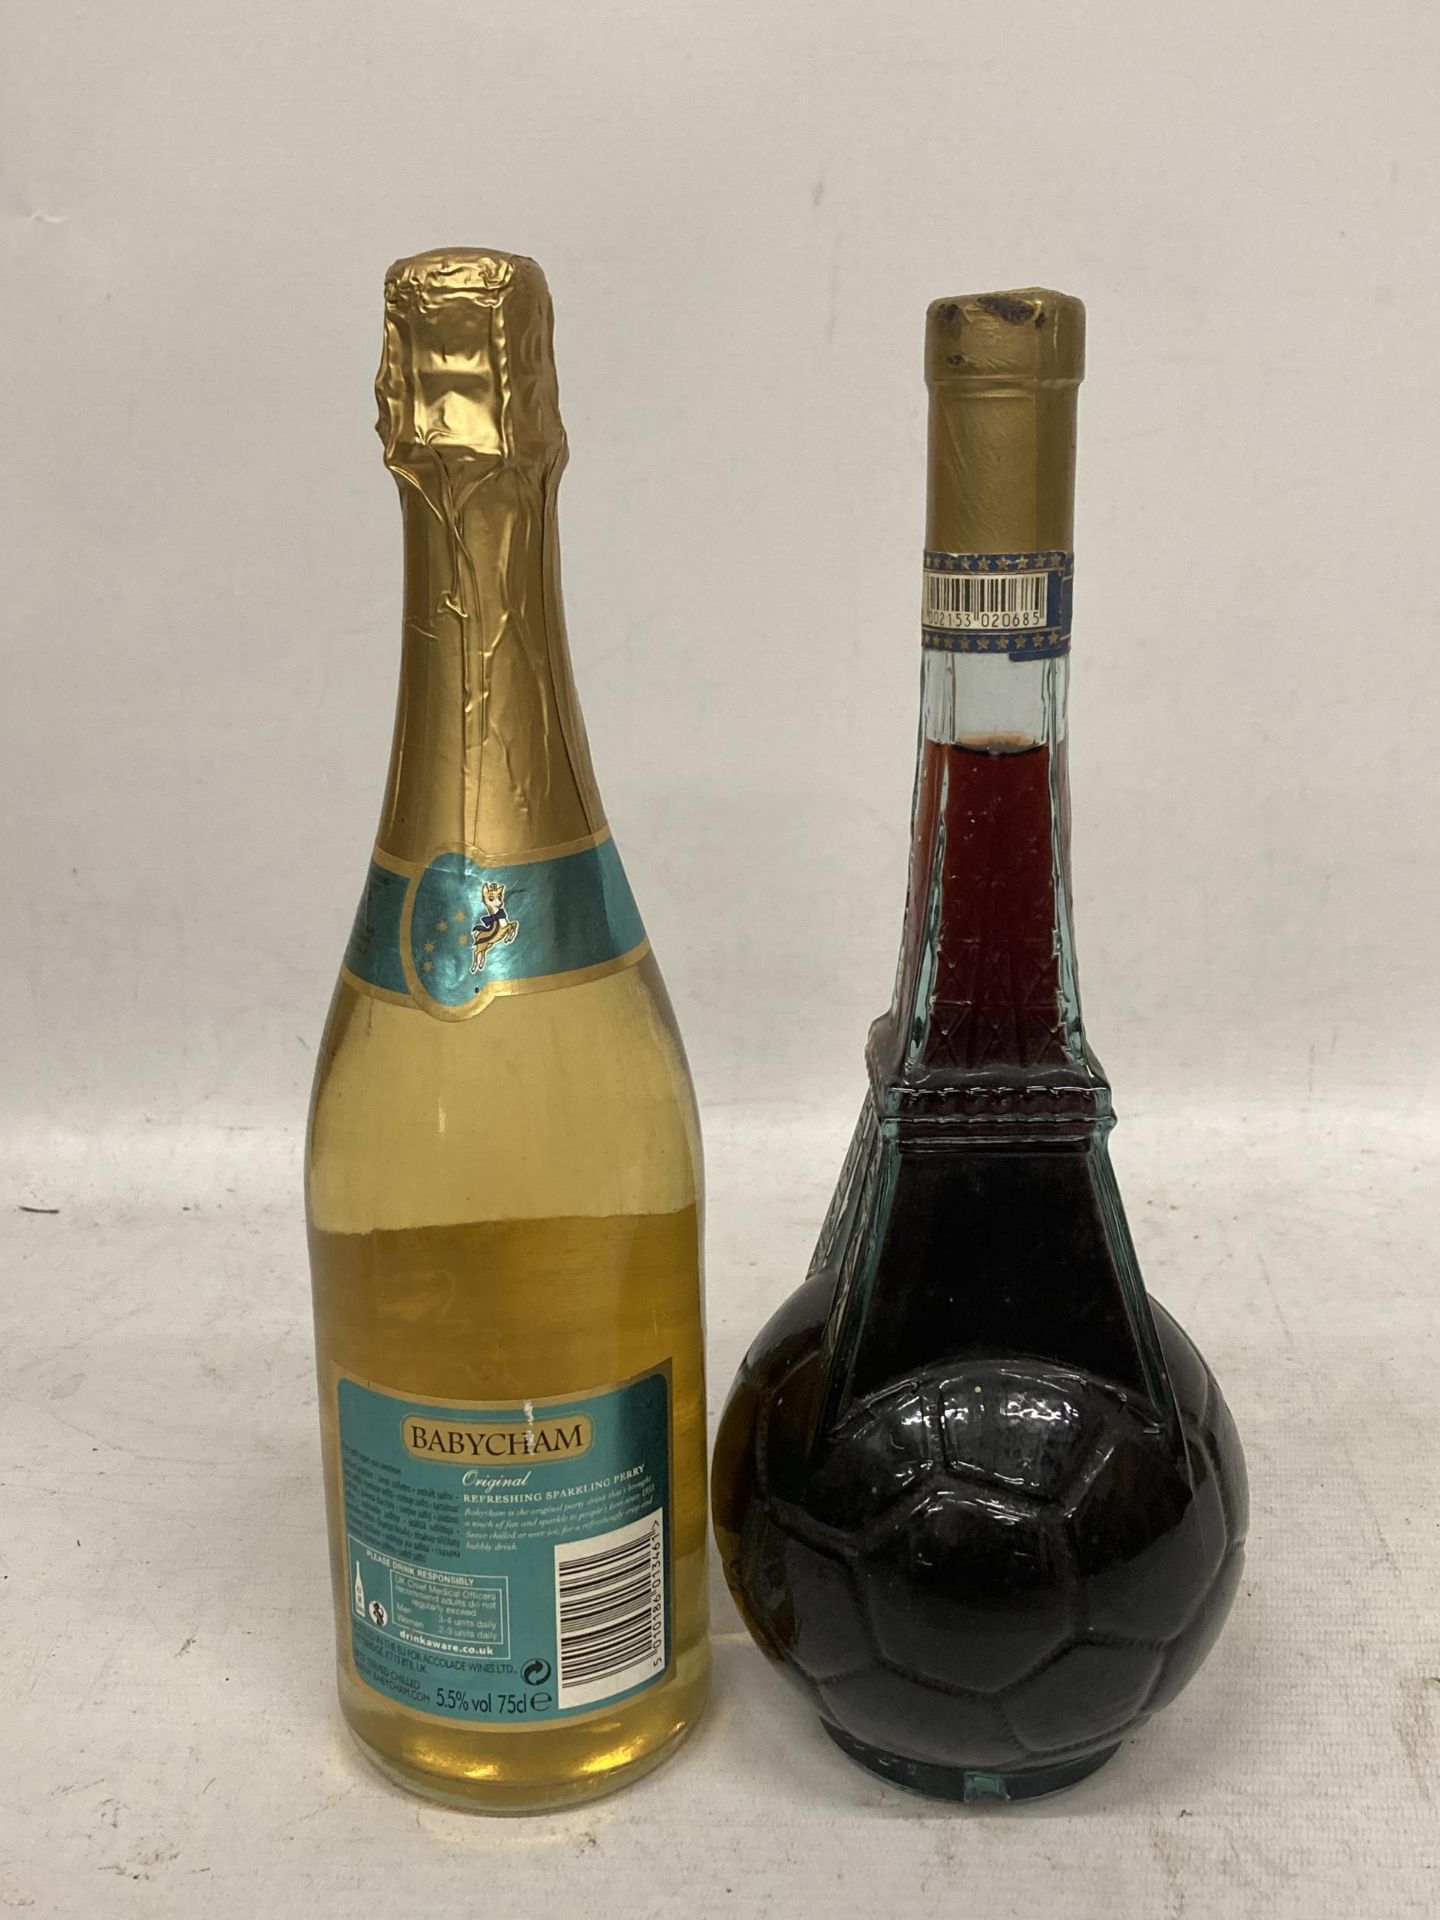 TWO BOTTLES - BABYCHAM ORIGINAL SPARKLING PERRY AND GOAL '98 WORLD CUP ROSE, CELEBRATING FRANCE AS - Image 2 of 2